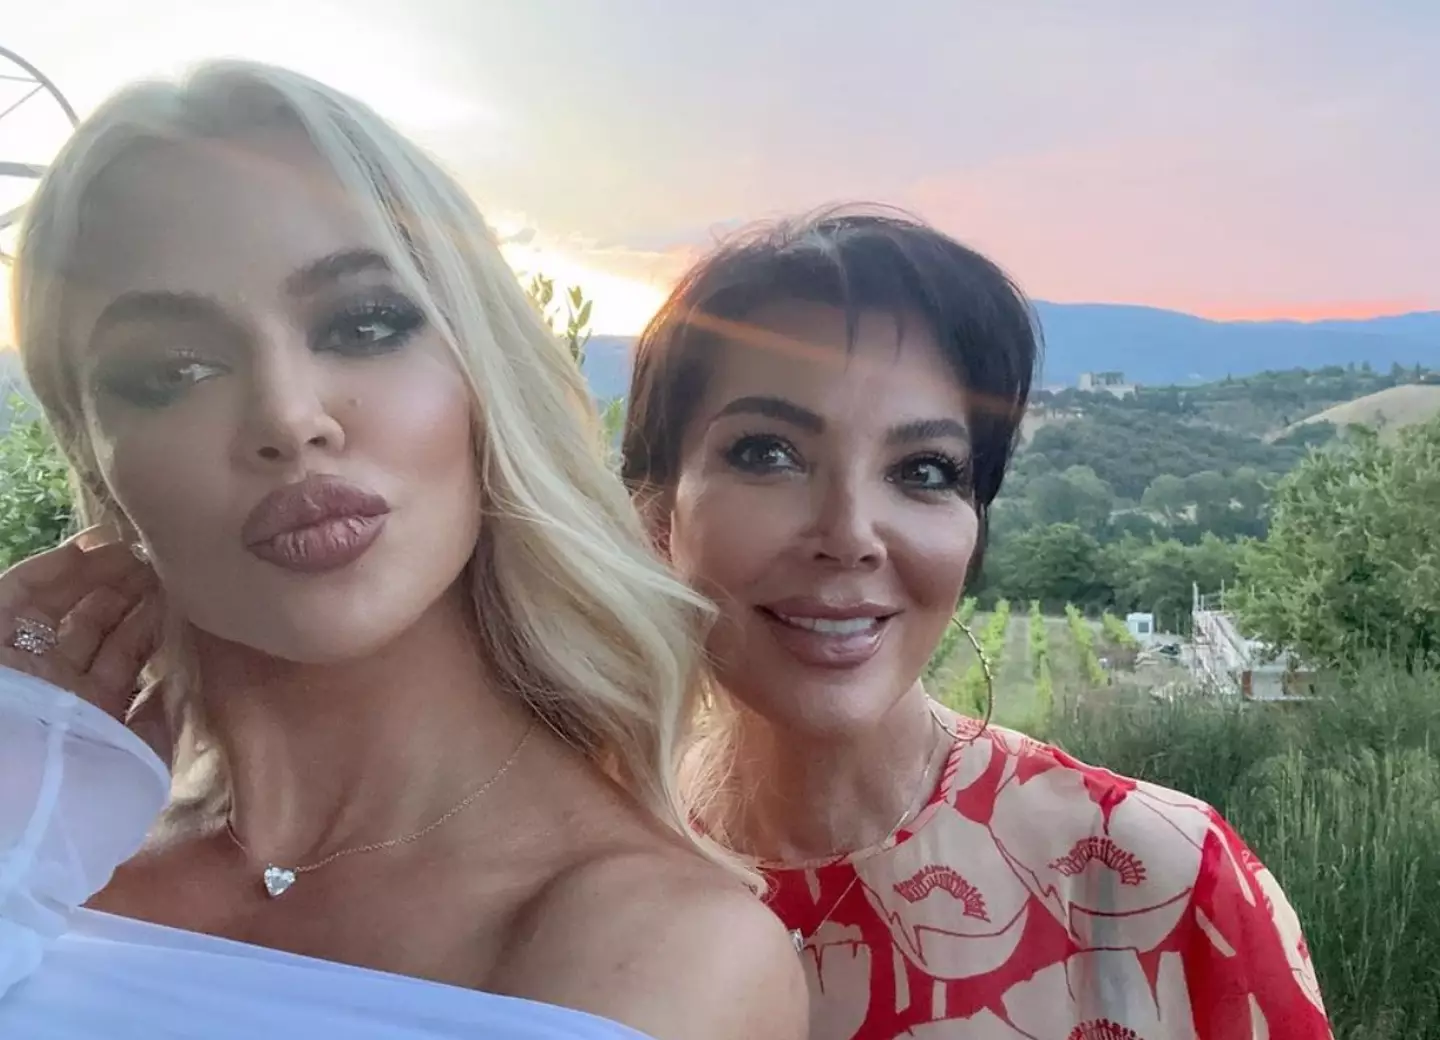 The celeb was also hit with negative comments after posting a snap with her mum.